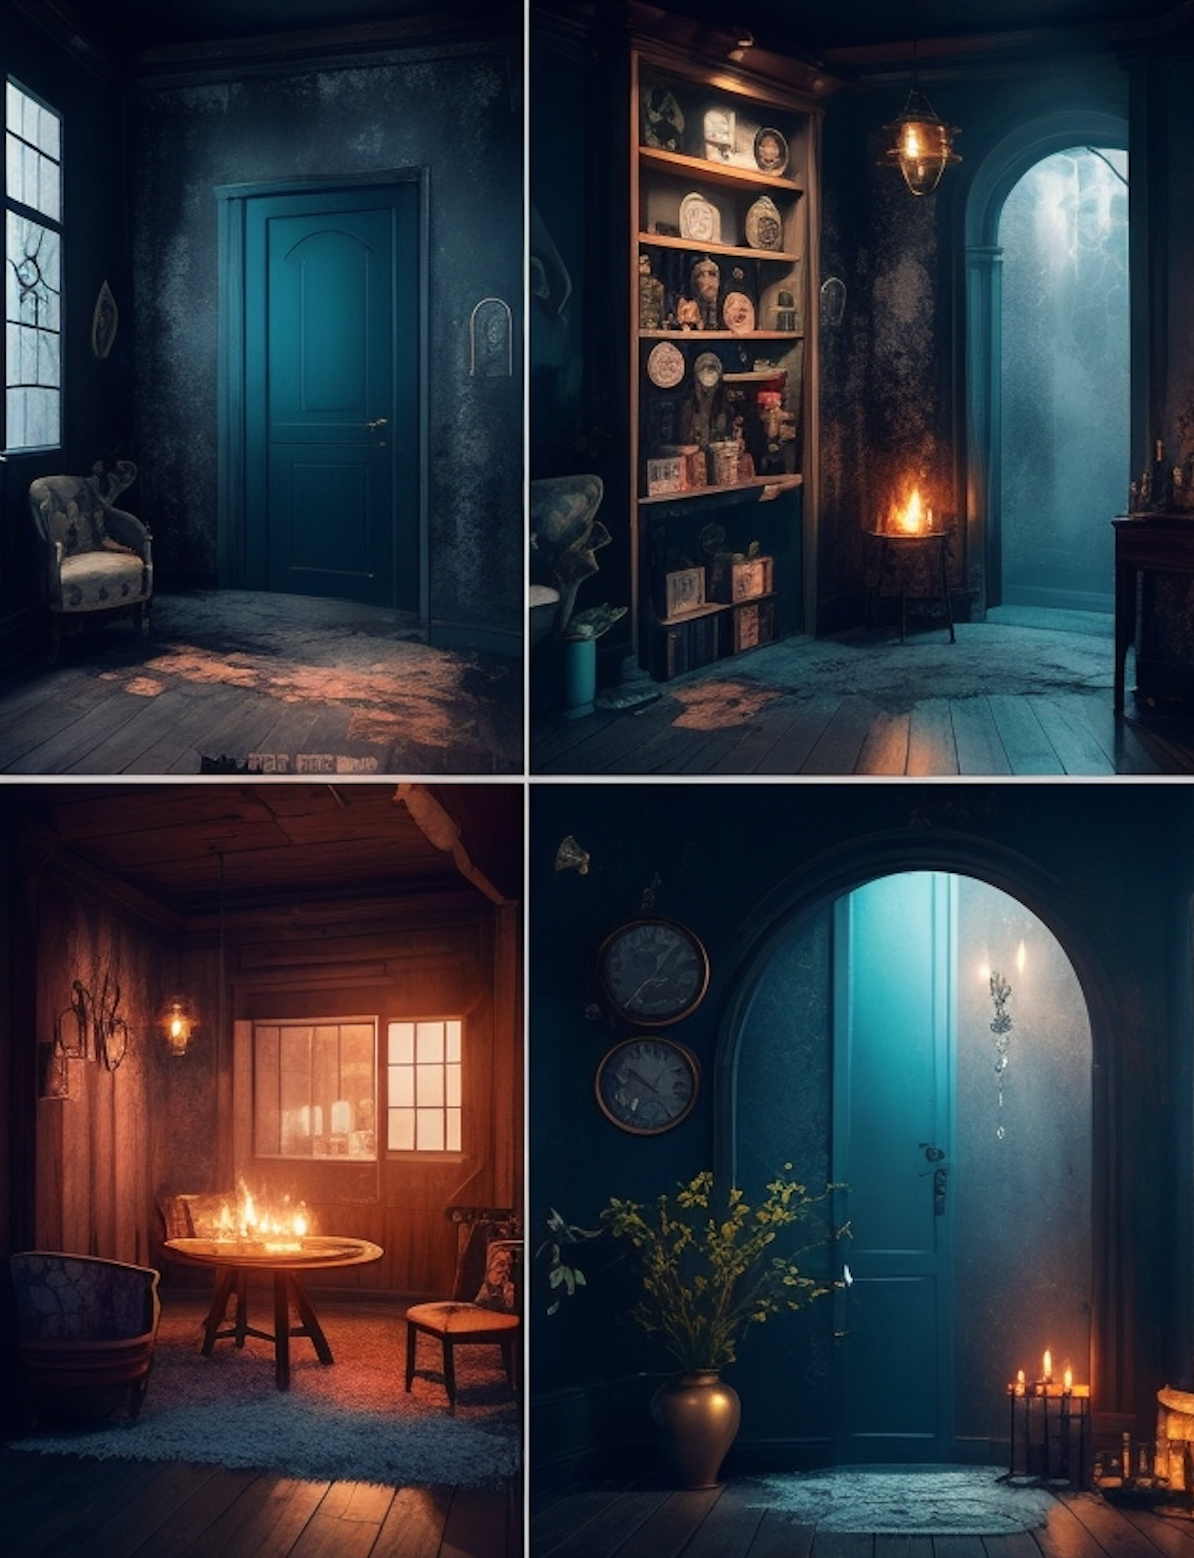 Discover Why Buying an Affordable Escape Room Design is the Best Option